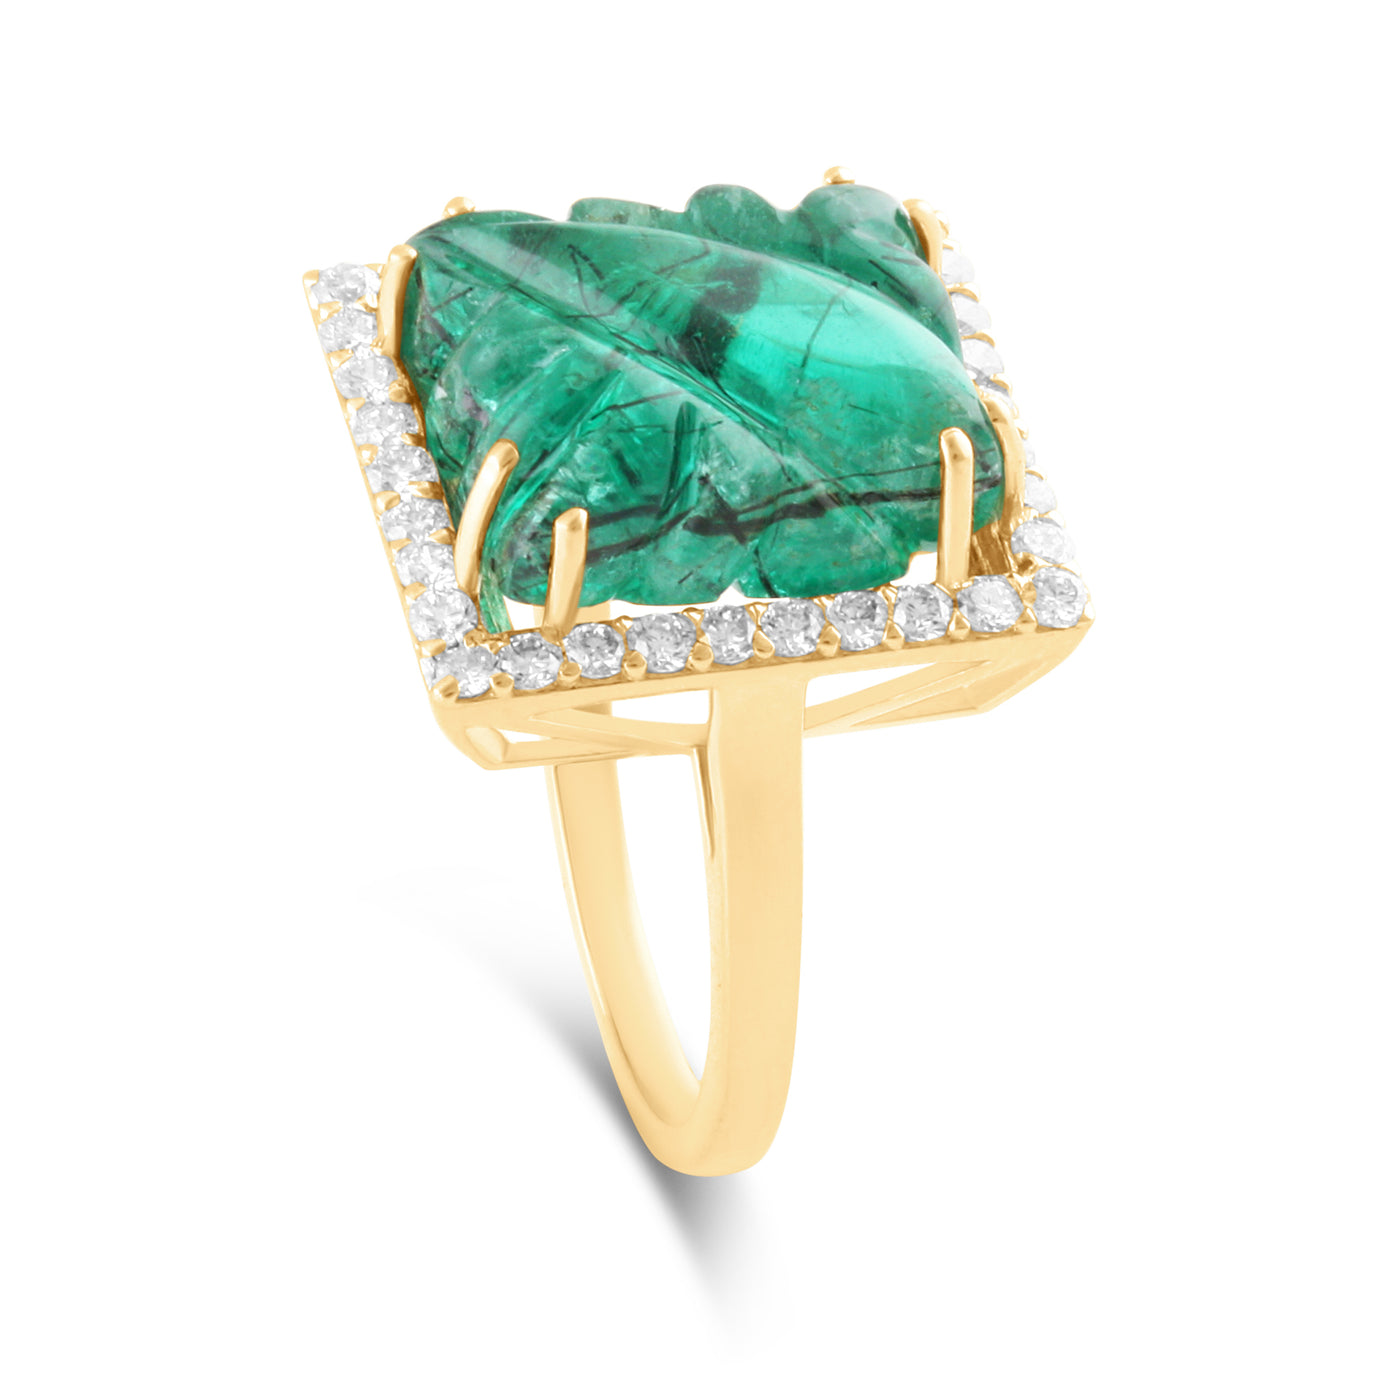 Emerald Carving And Diamond Ring In 18K Yellow Gold